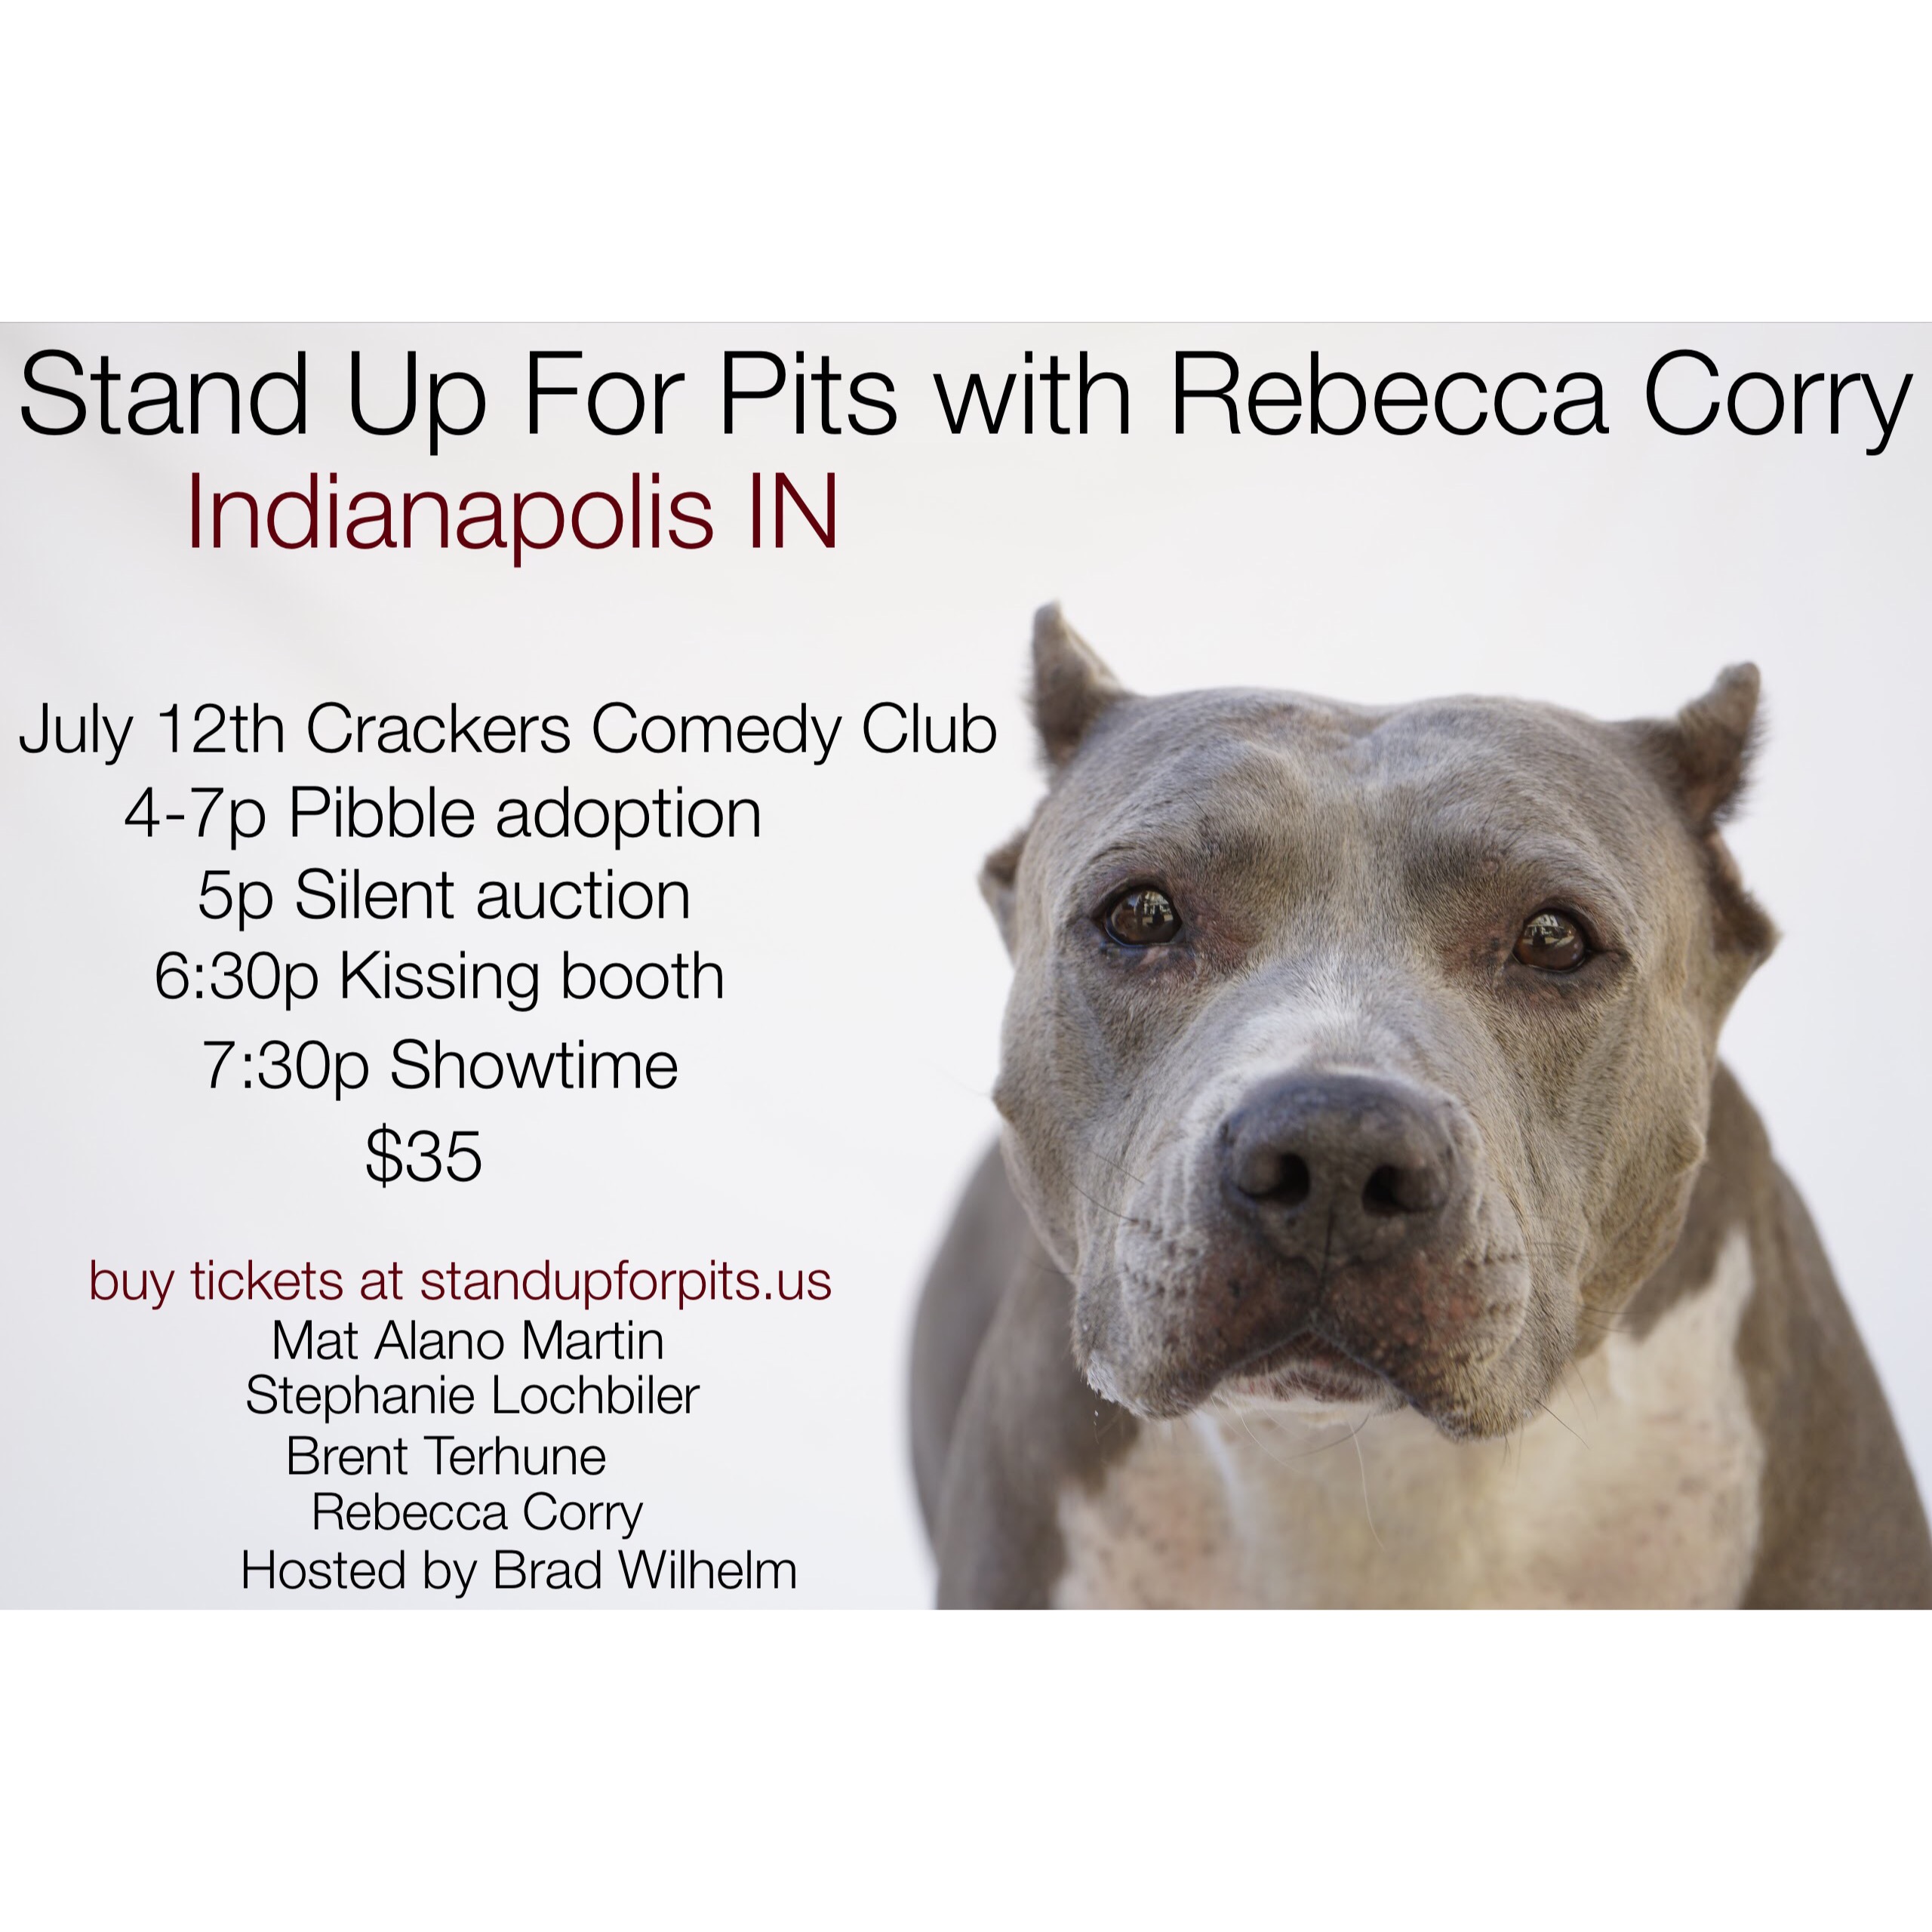 FEW TICKETS left for Stand Up For Pits INDIANAPOLIS!!